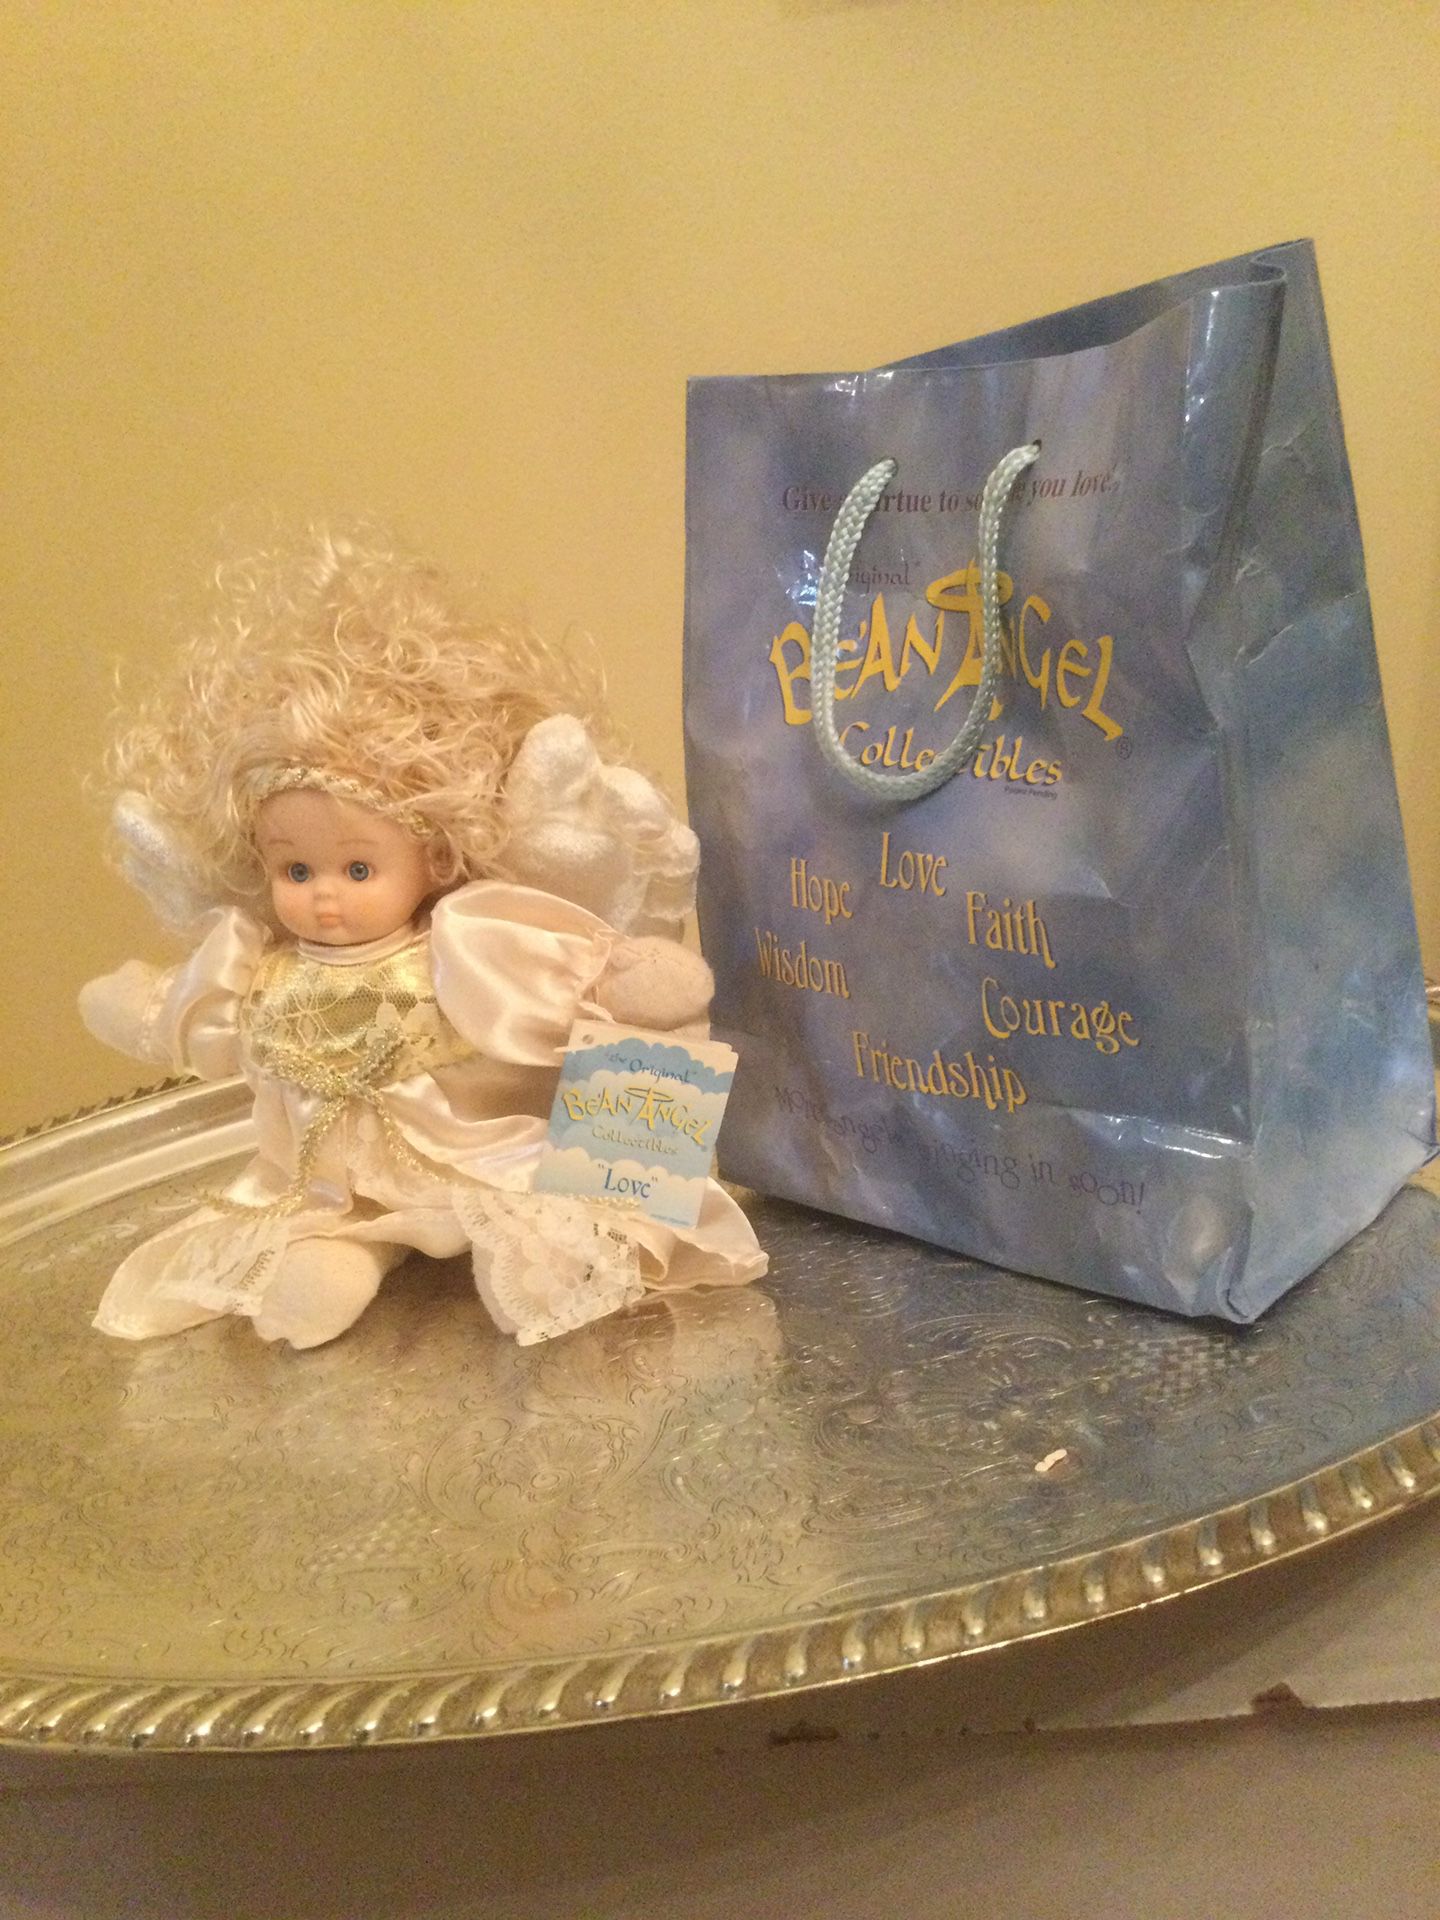 Bean Angel Collectible Doll